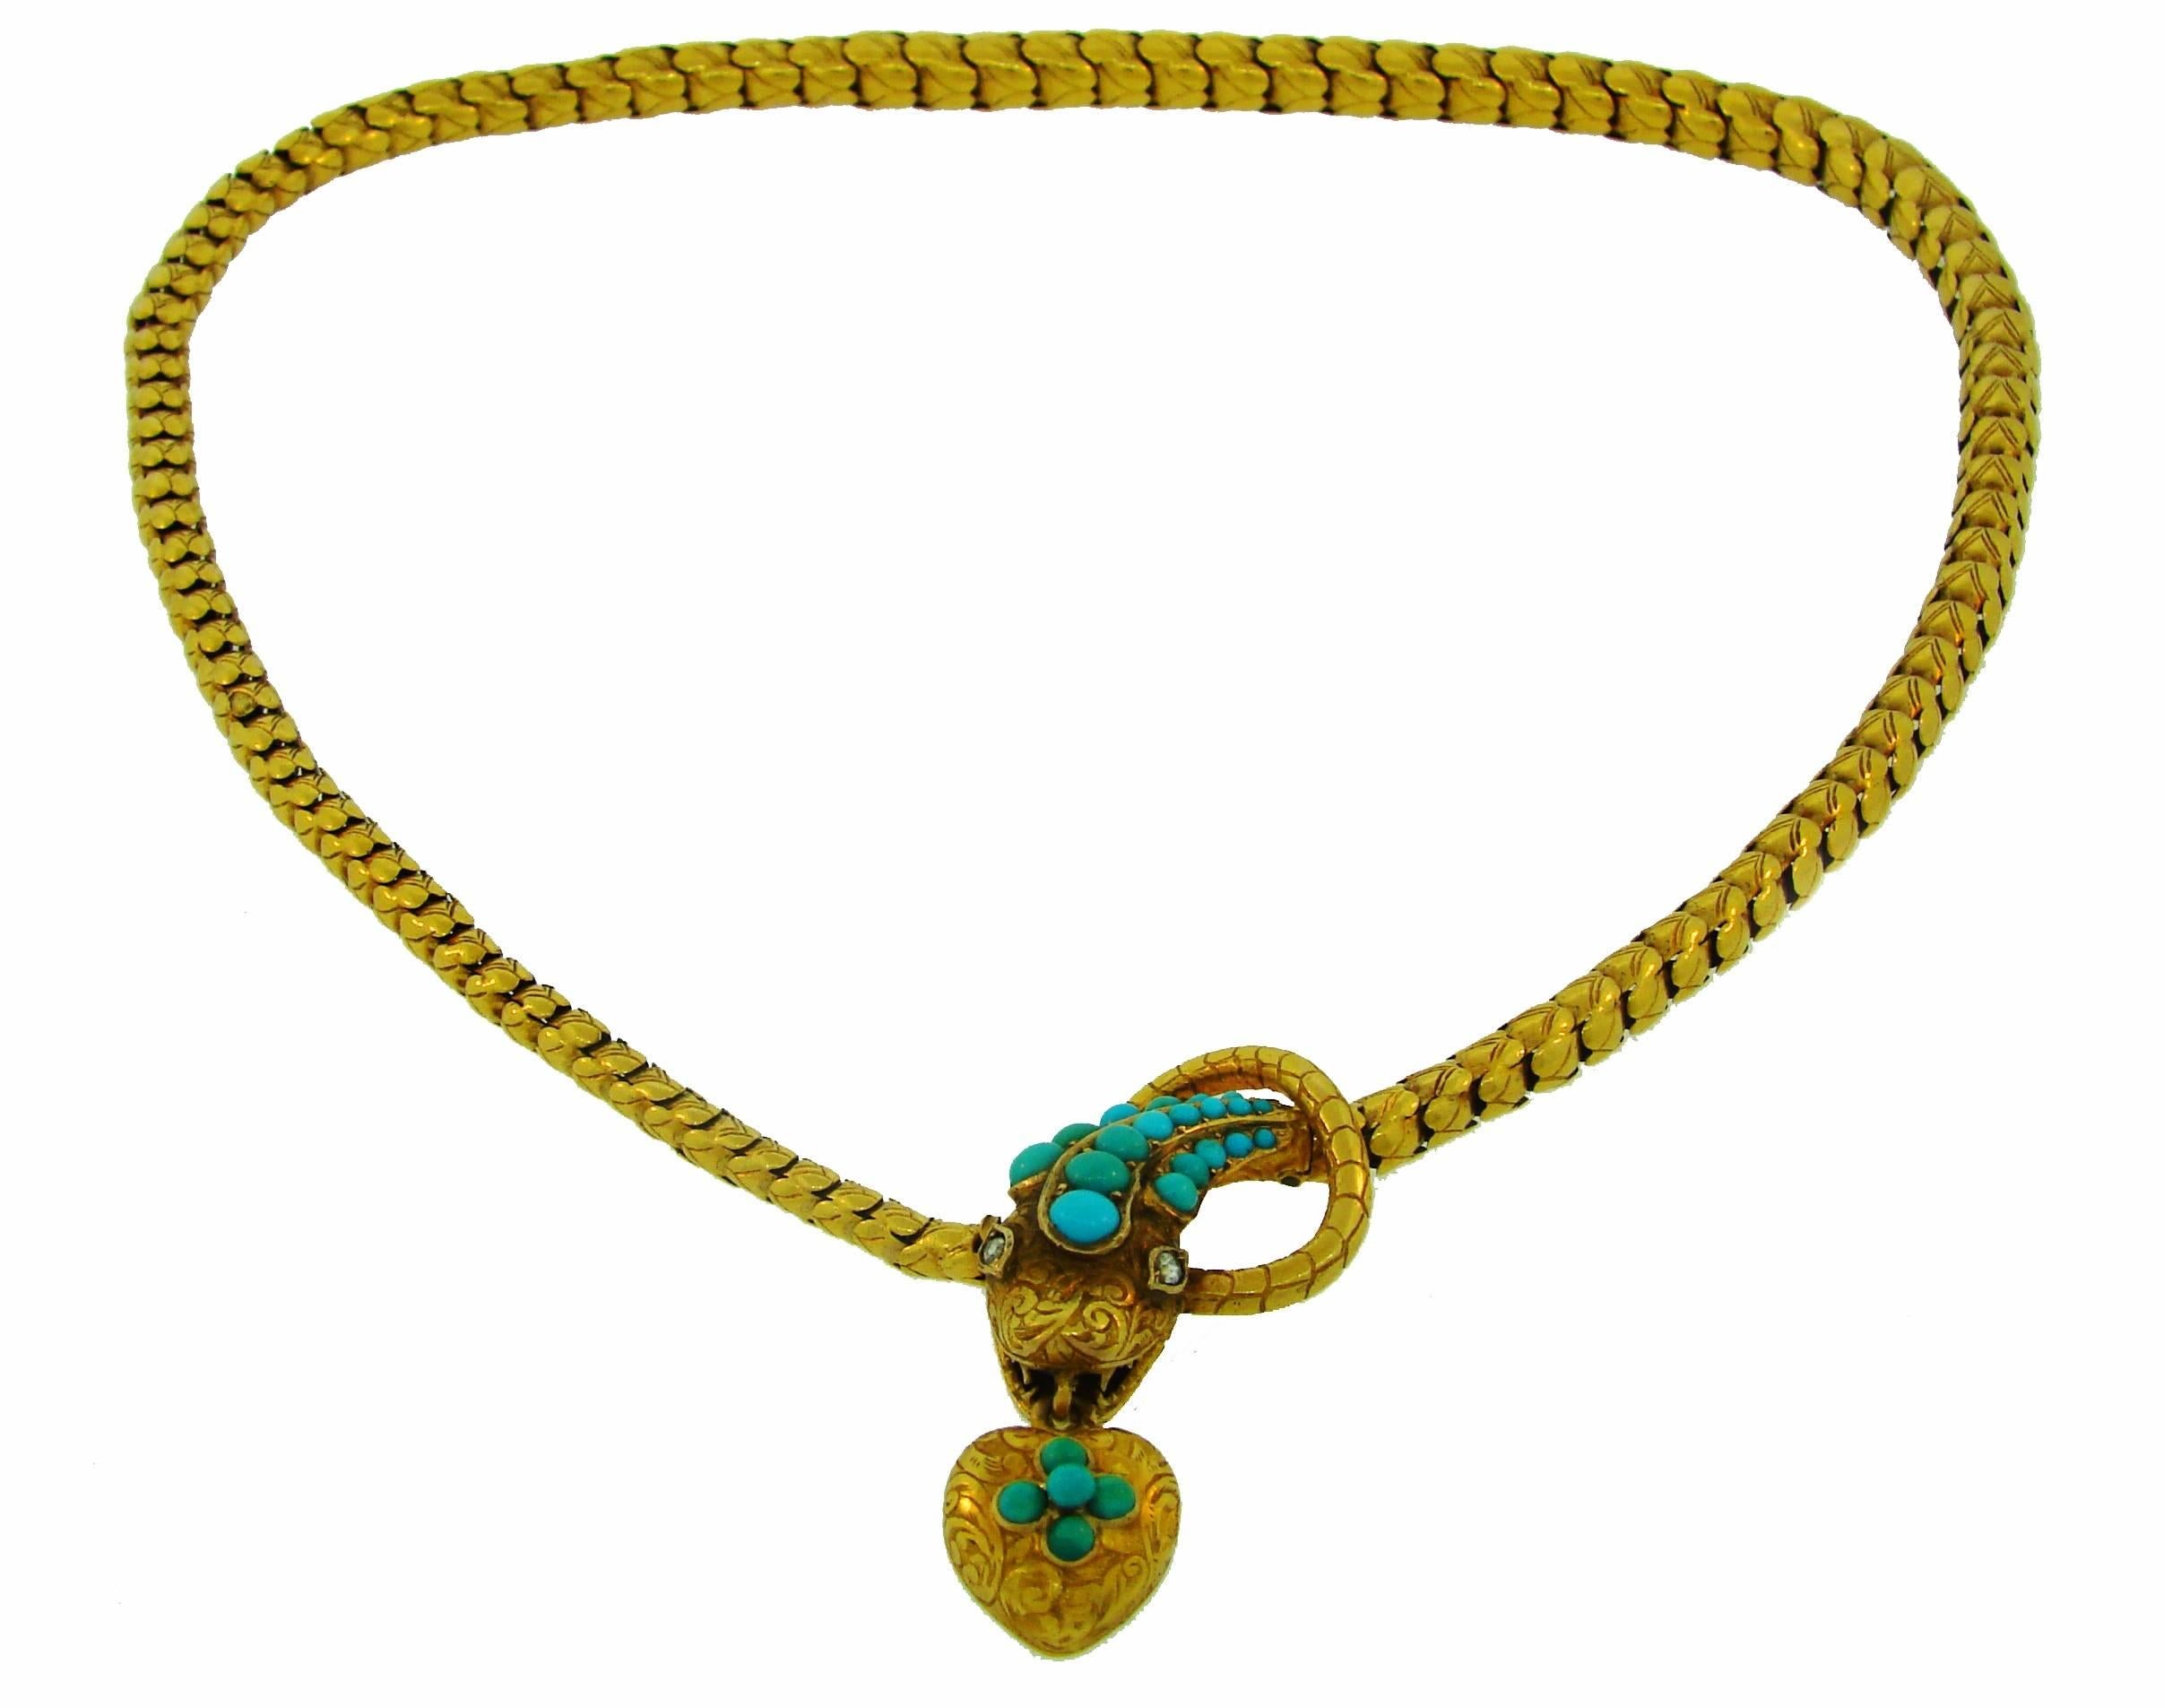 Stunning Victorian snake necklace created in the 1900's.
People were always fascinated by snakes and since ancient times that fascination has made snake motif widely used in jewelry. 
This necklace is made of yellow gold and turquoise. The snake's